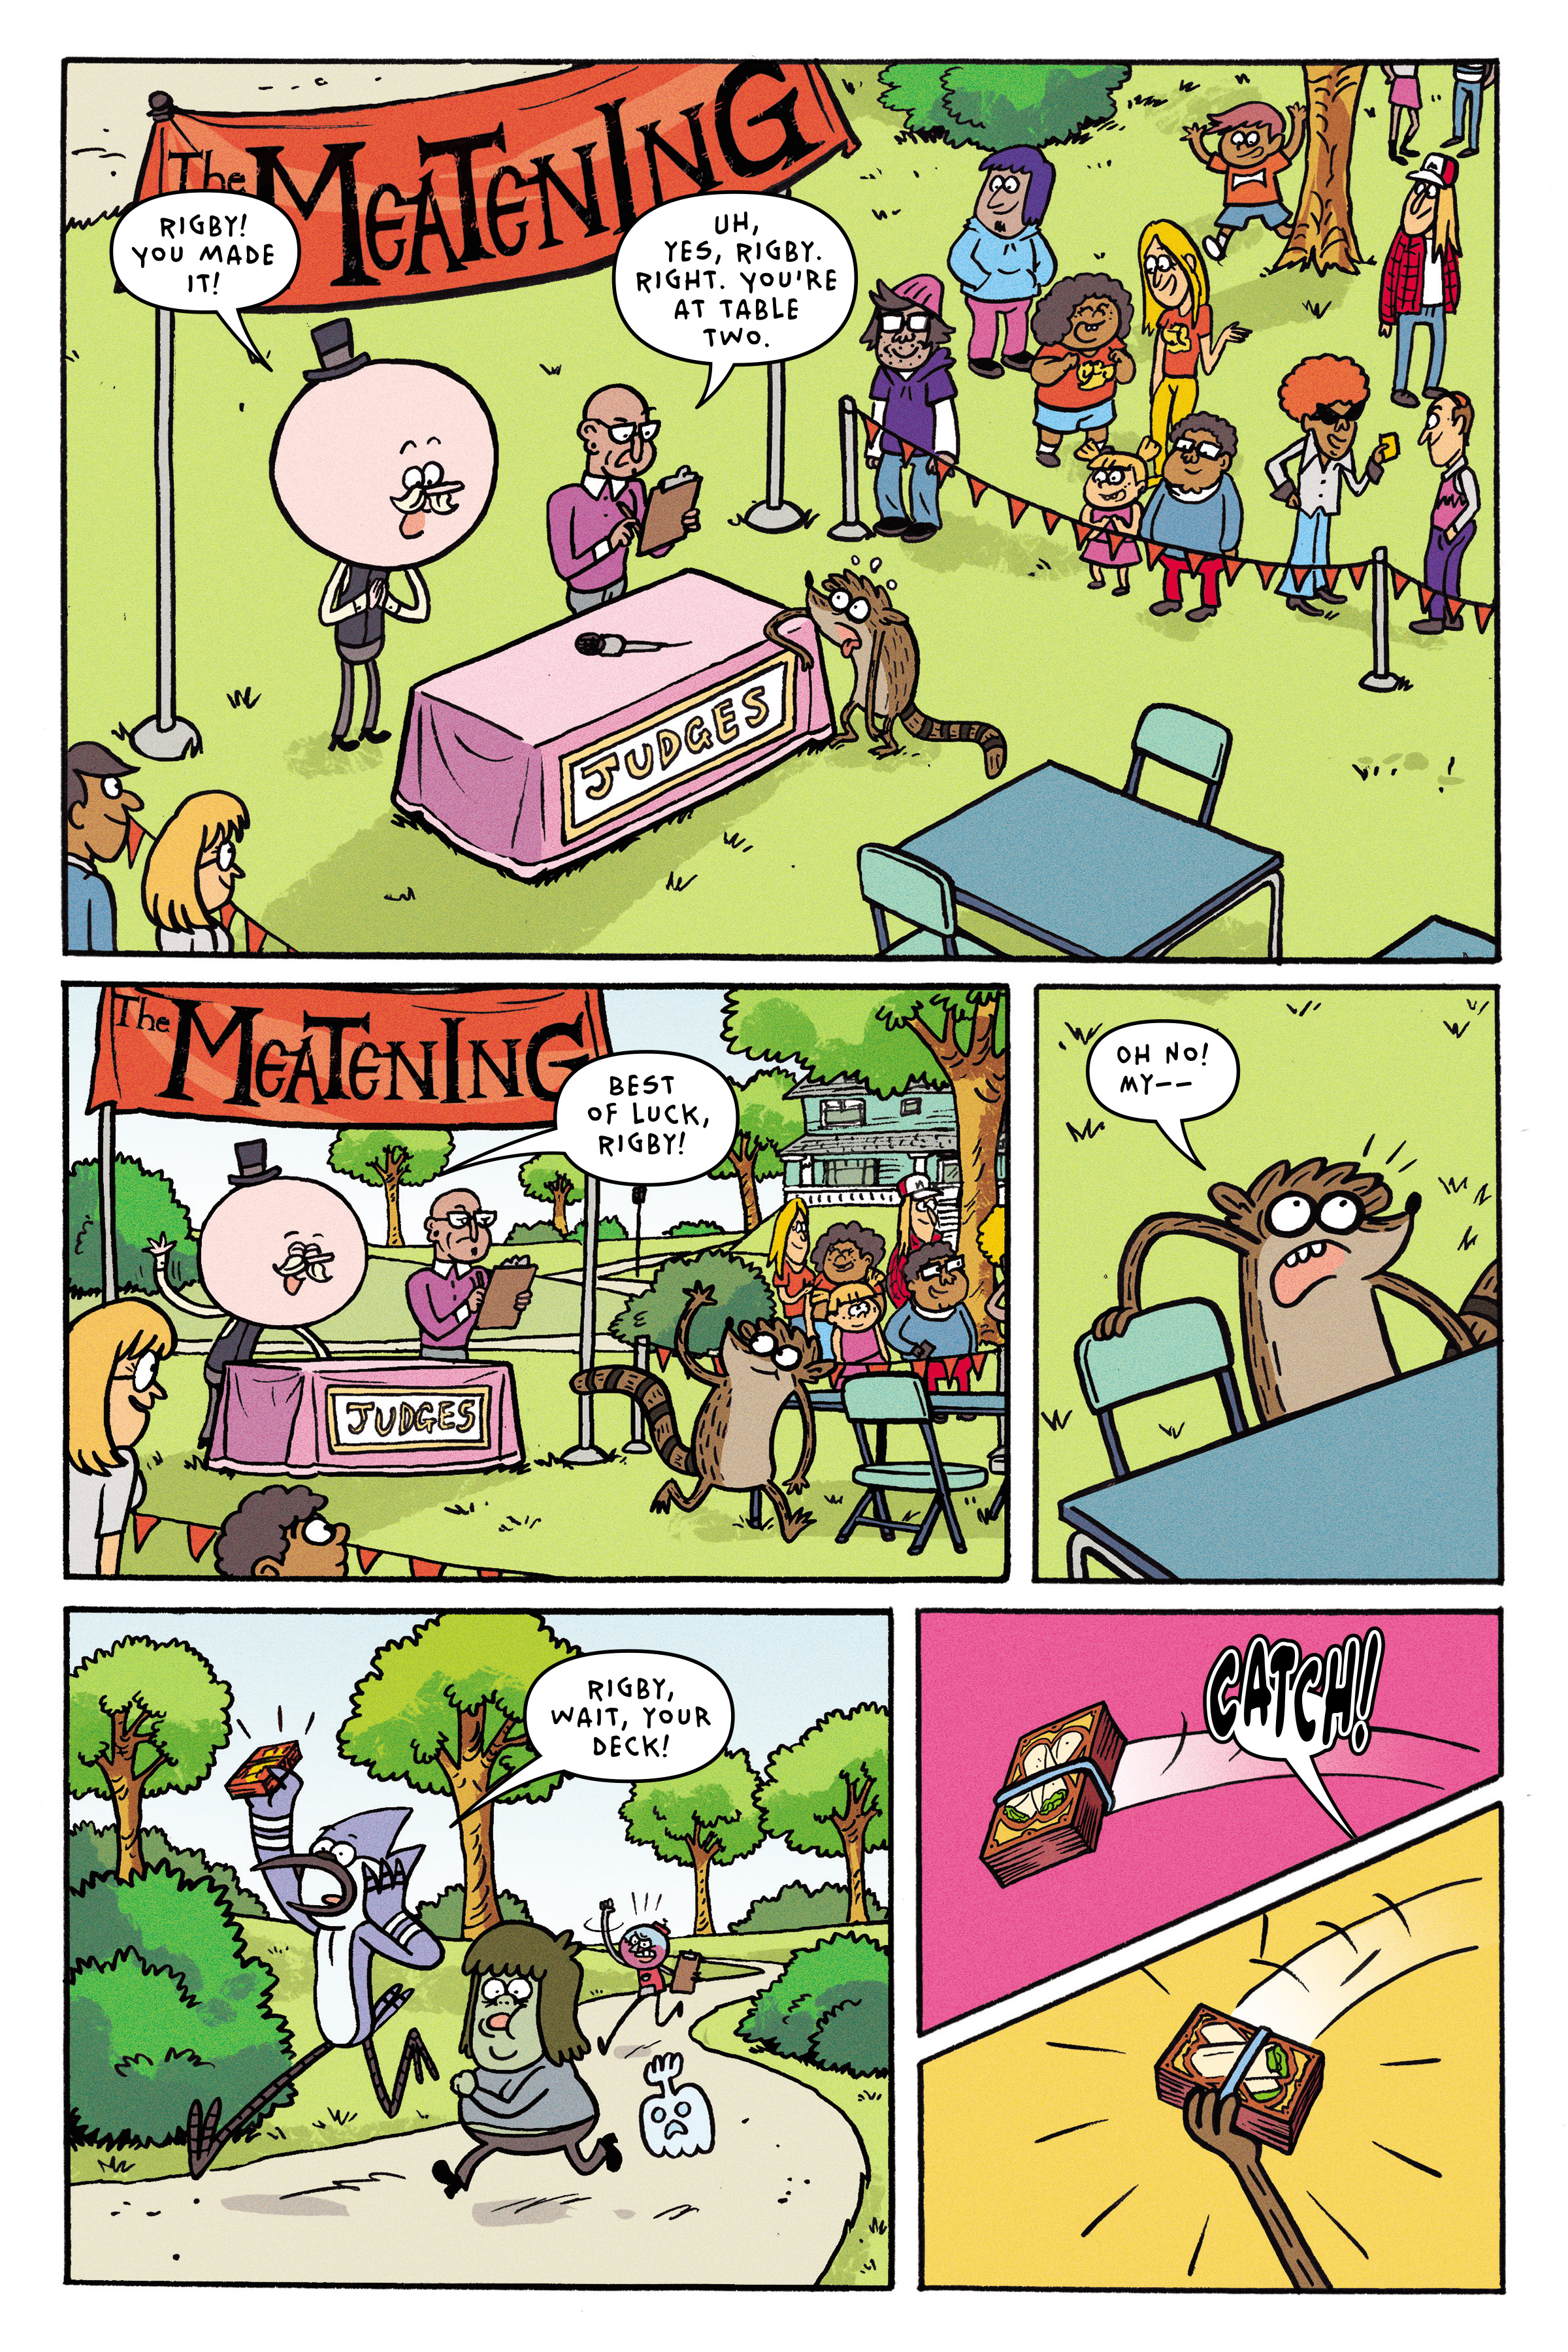 Read online Regular Show: The Meatening comic -  Issue # TPB - 105